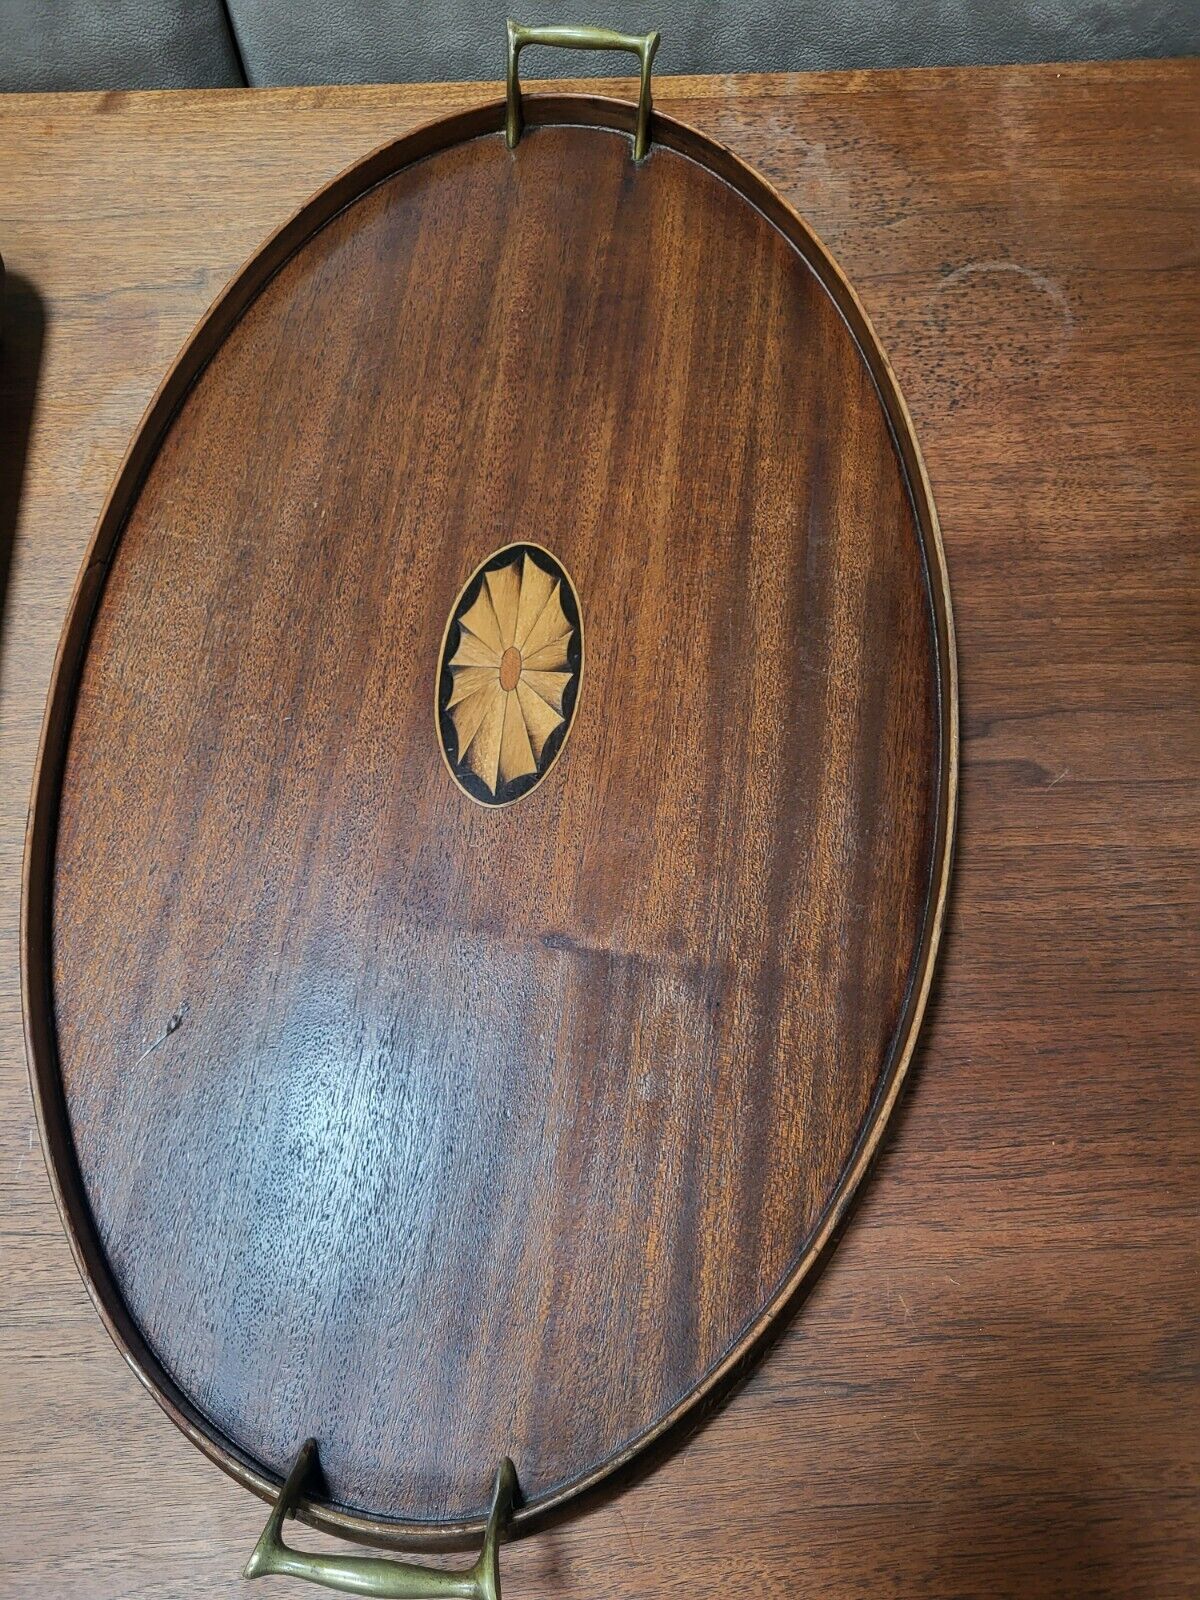  Antique Mahogany Inlay Edwardian Serving Tray With Brass Handles